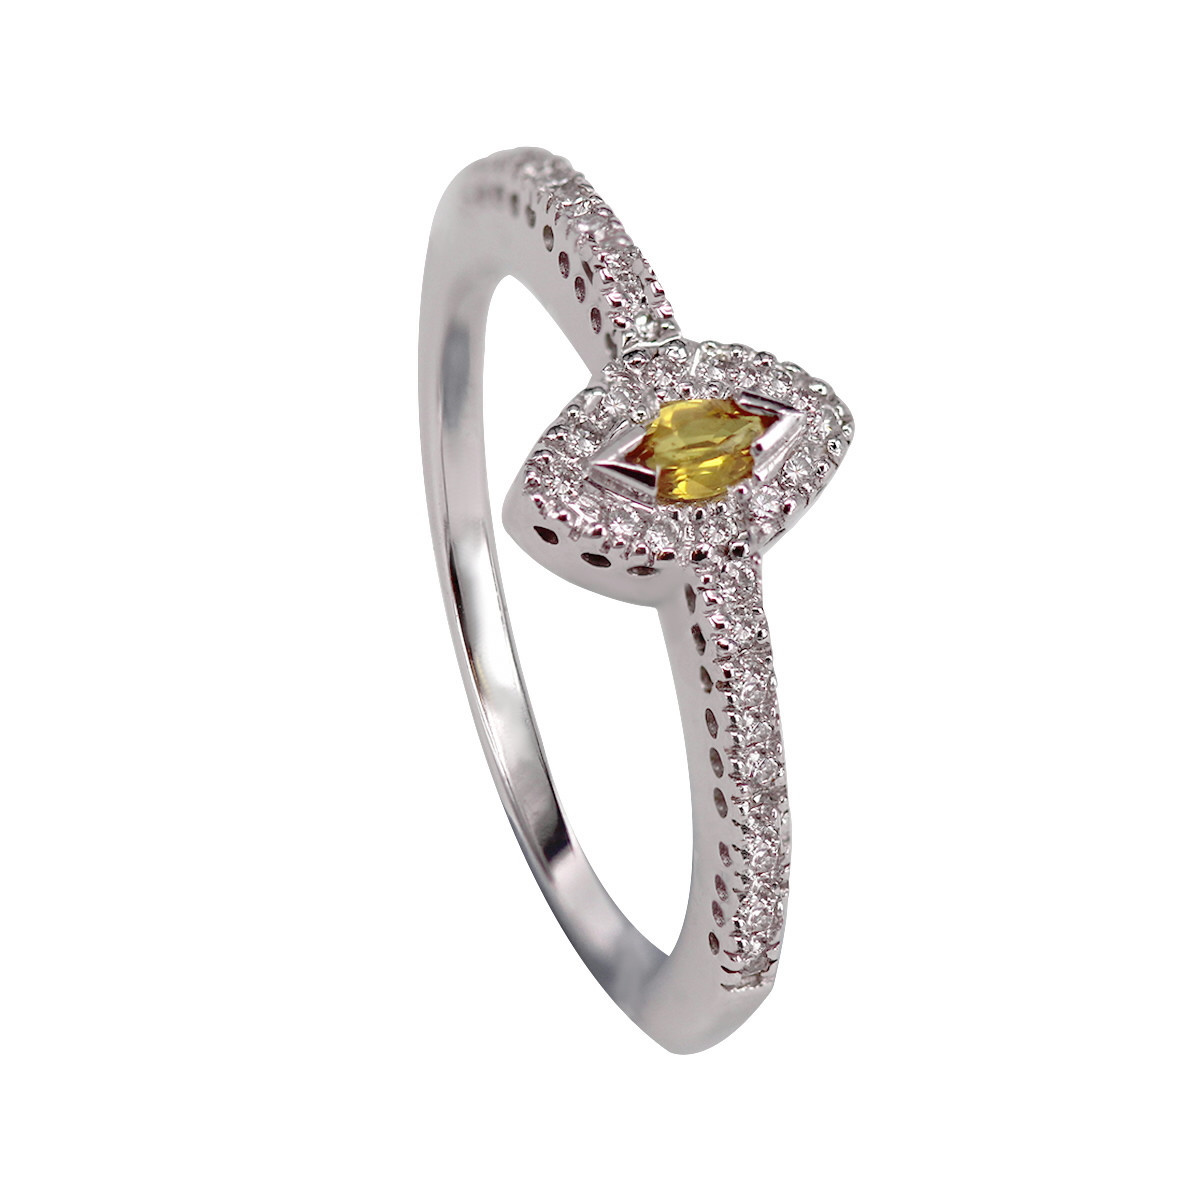 RING MADE OF WHITE GOLD AND YELLOW SAPPHIRE DIAMONDS